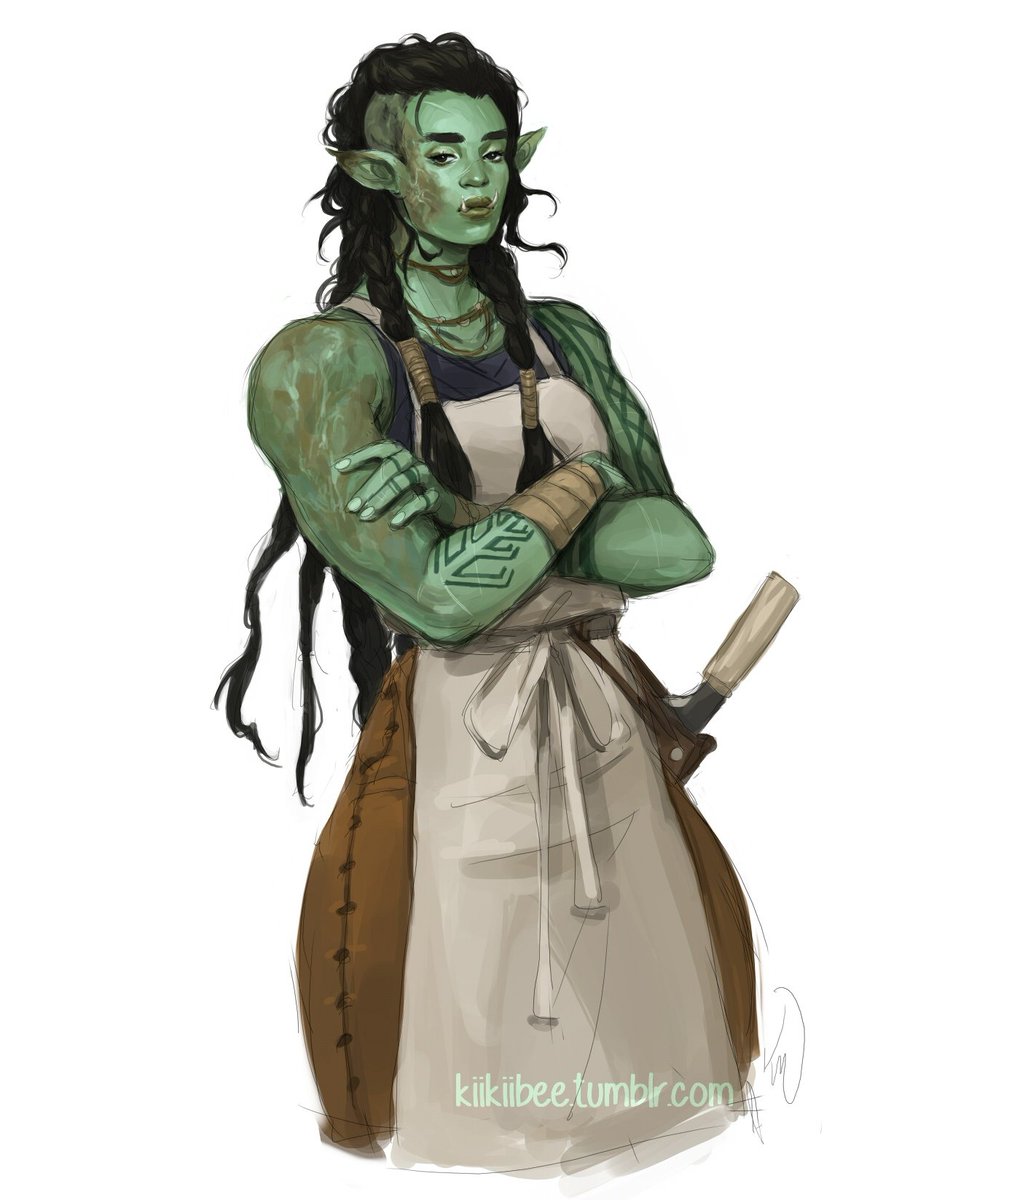 kiiwala on Twitter: "commission of a half-orc barbarian ...